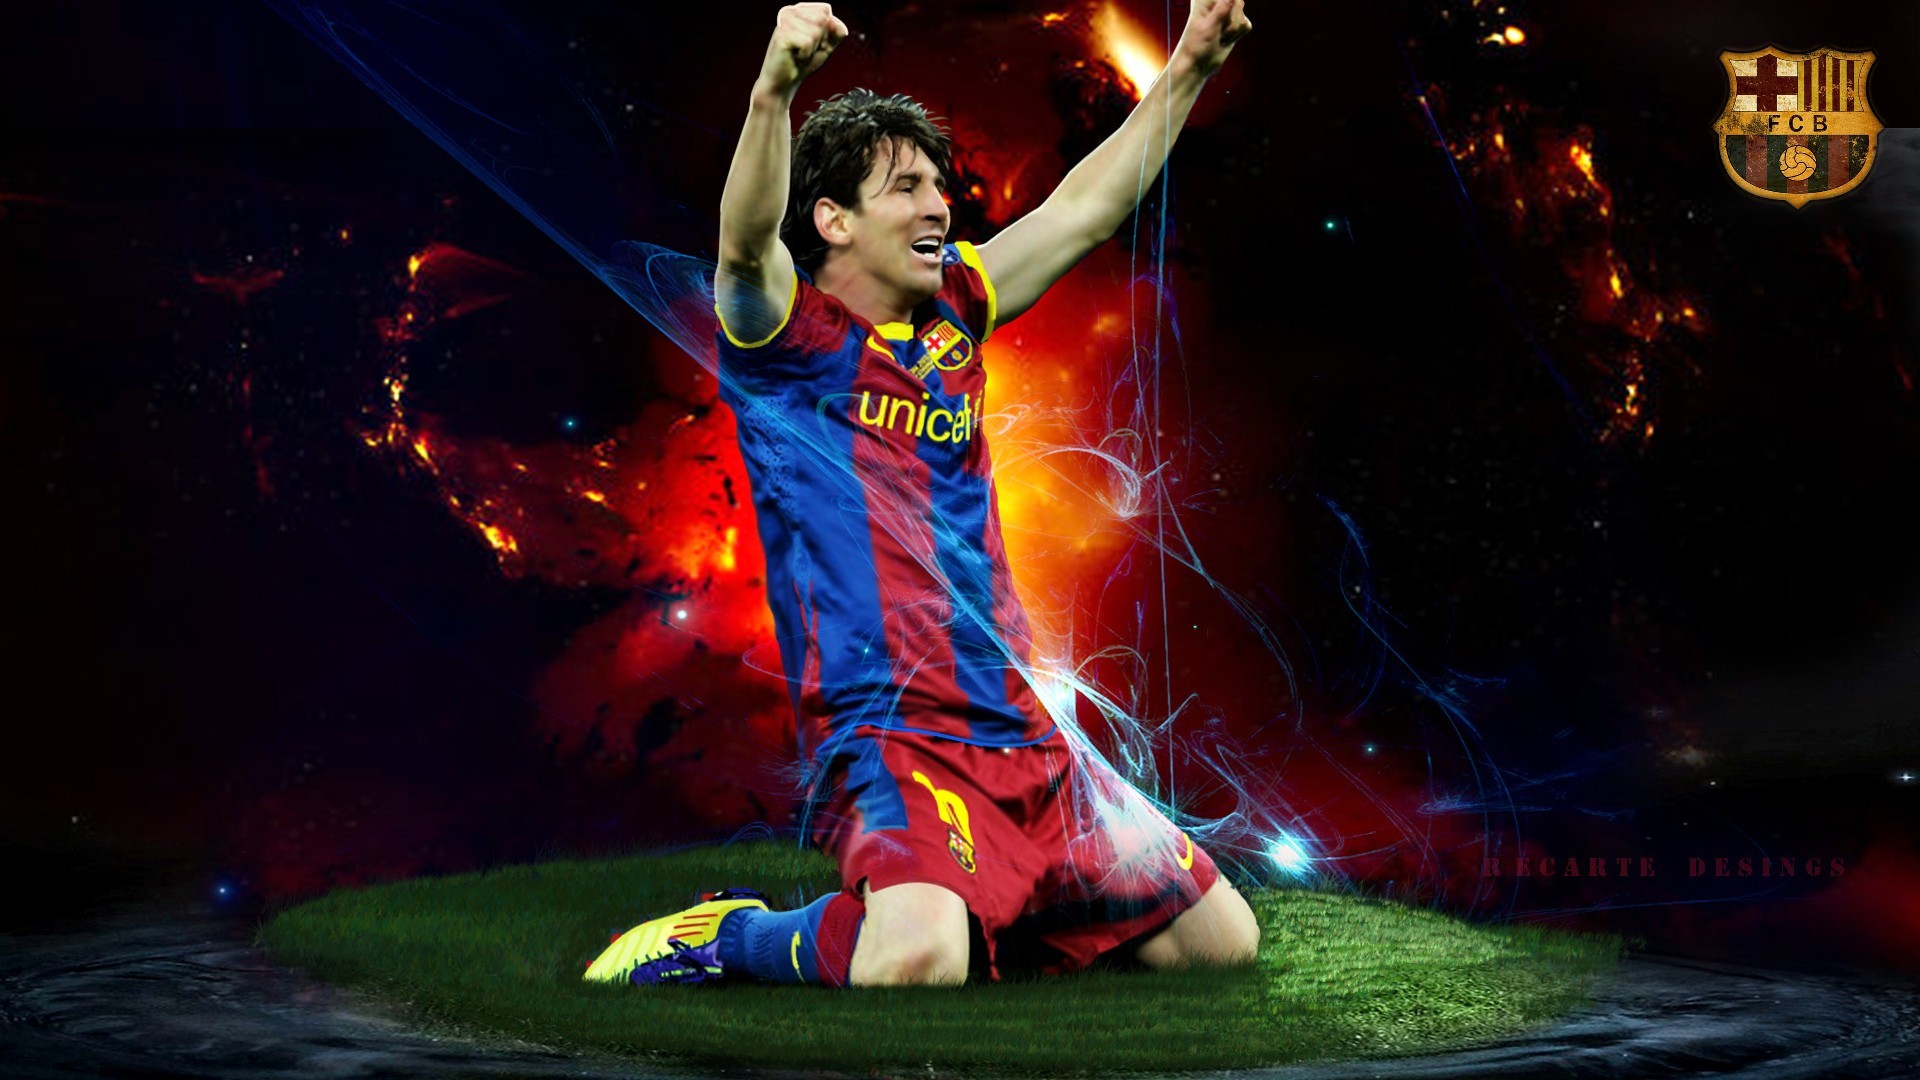 HD Messi Wallpapers with resolution 1920x1080 pixel. You can make this wallpaper for your Mac or Windows Desktop Background, iPhone, Android or Tablet and another Smartphone device